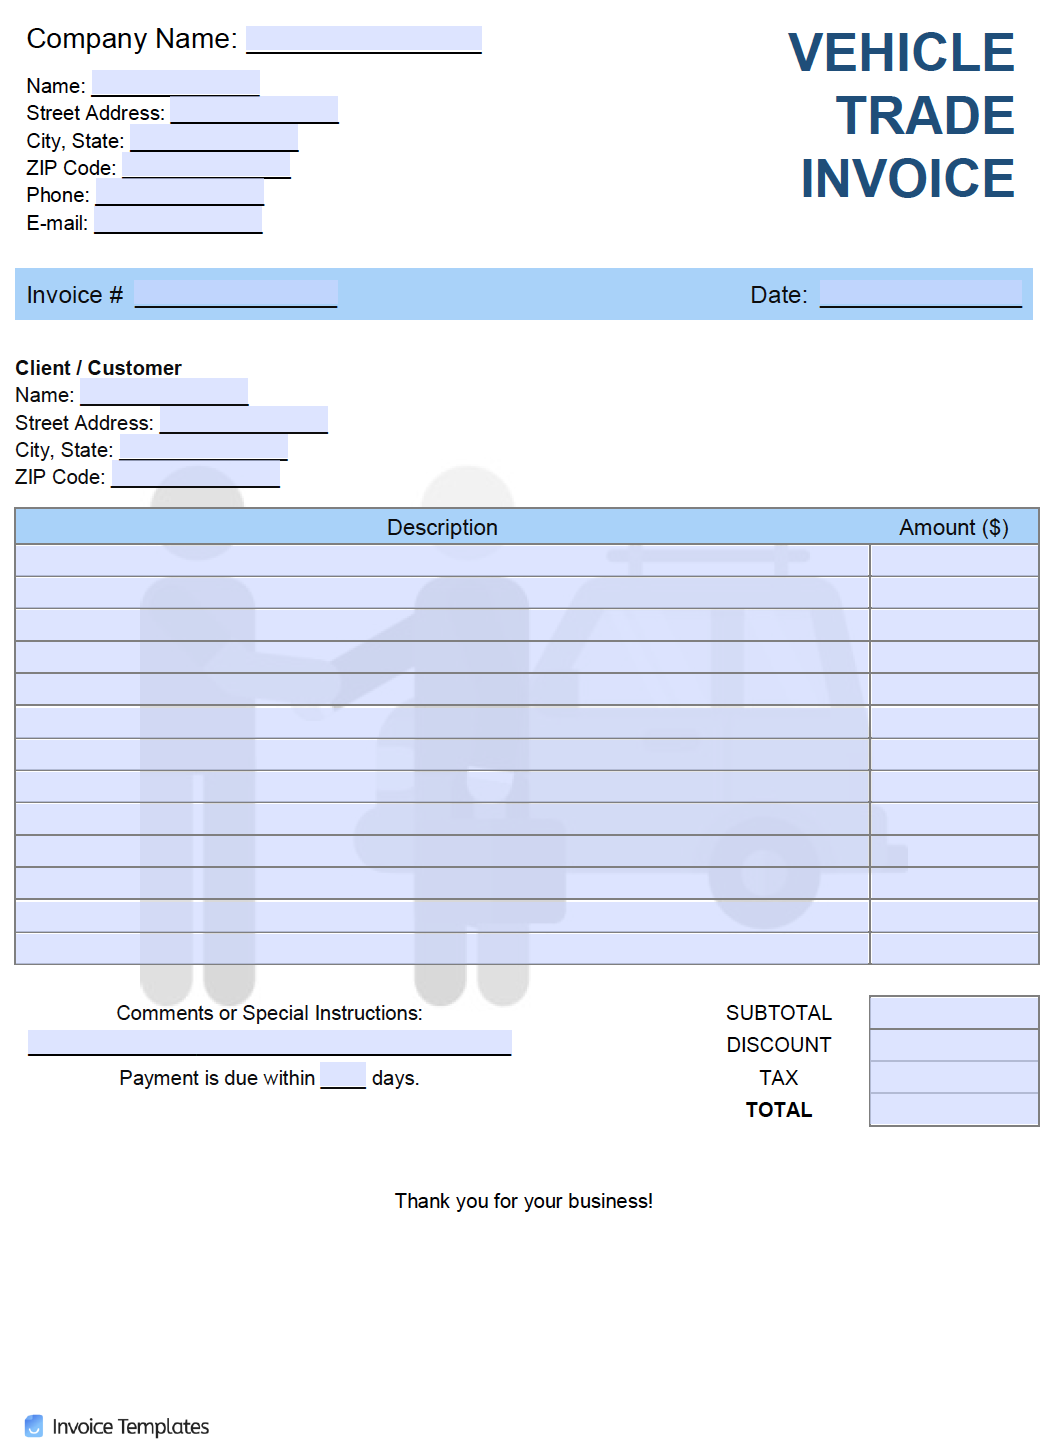 Free Vehicle Trade Invoice Template  PDF  WORD  EXCEL Pertaining To Car Sales Invoice Template Free Download